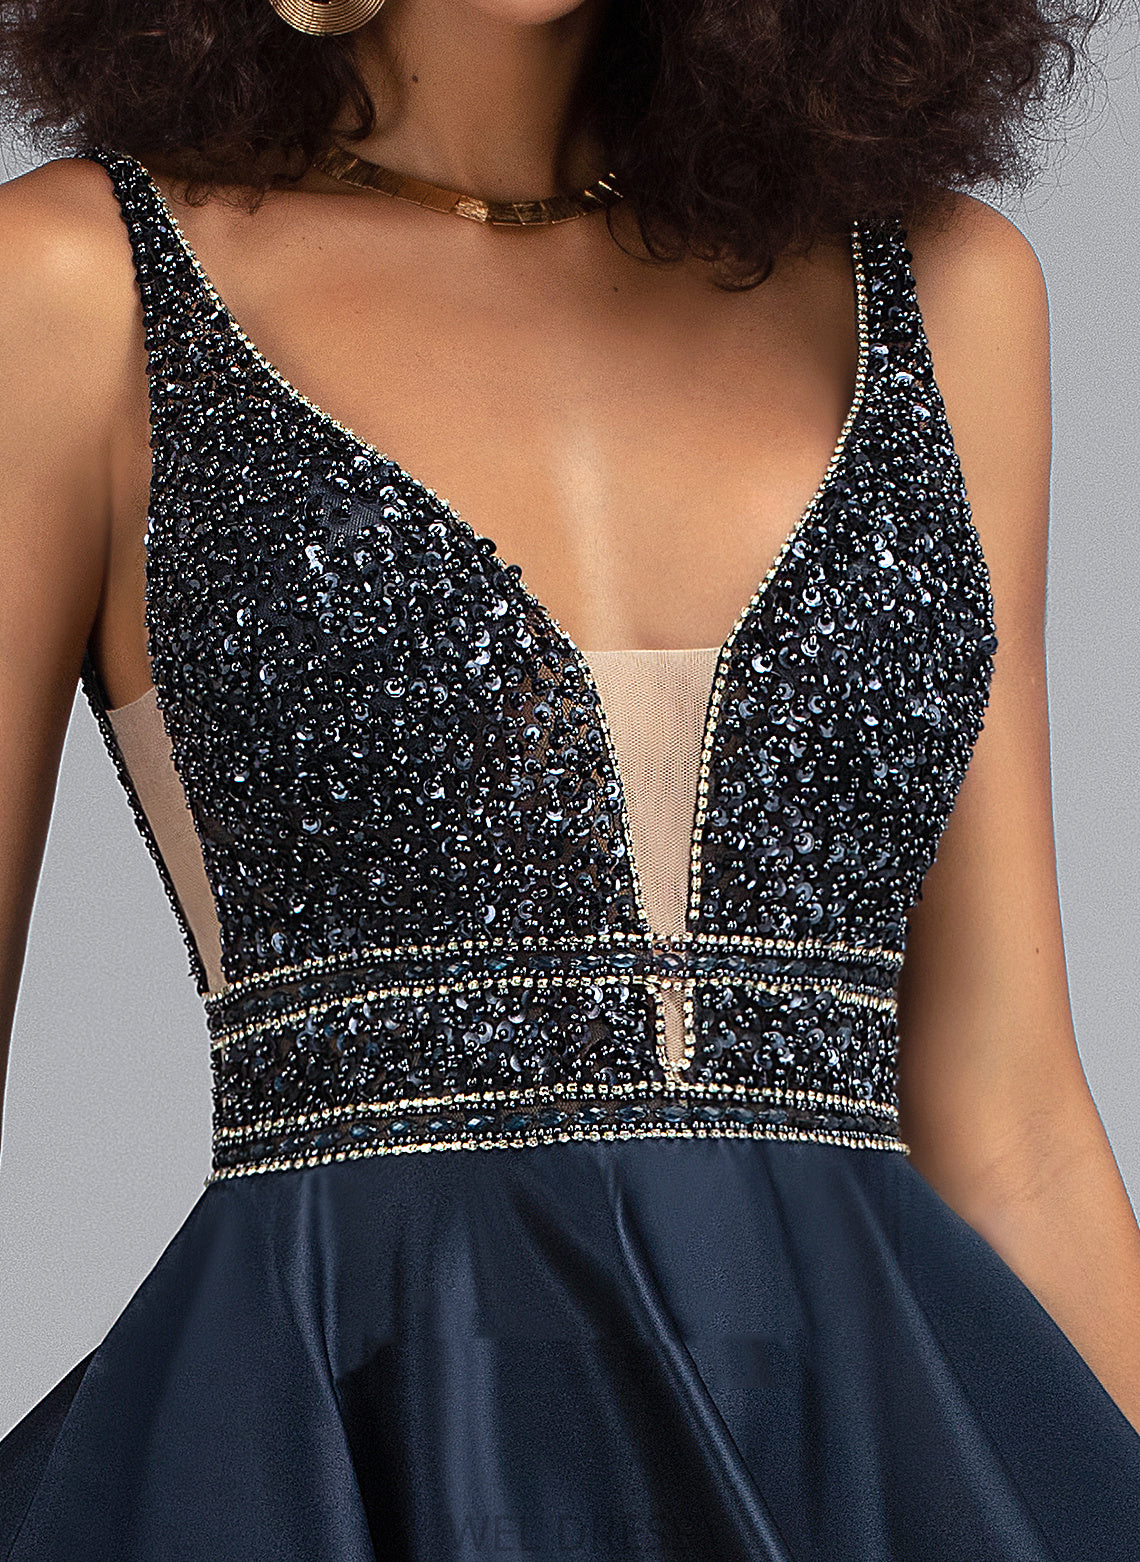 Beading Dress With Homecoming Dresses Carlee Homecoming V-neck Satin A-Line Short/Mini Sequins